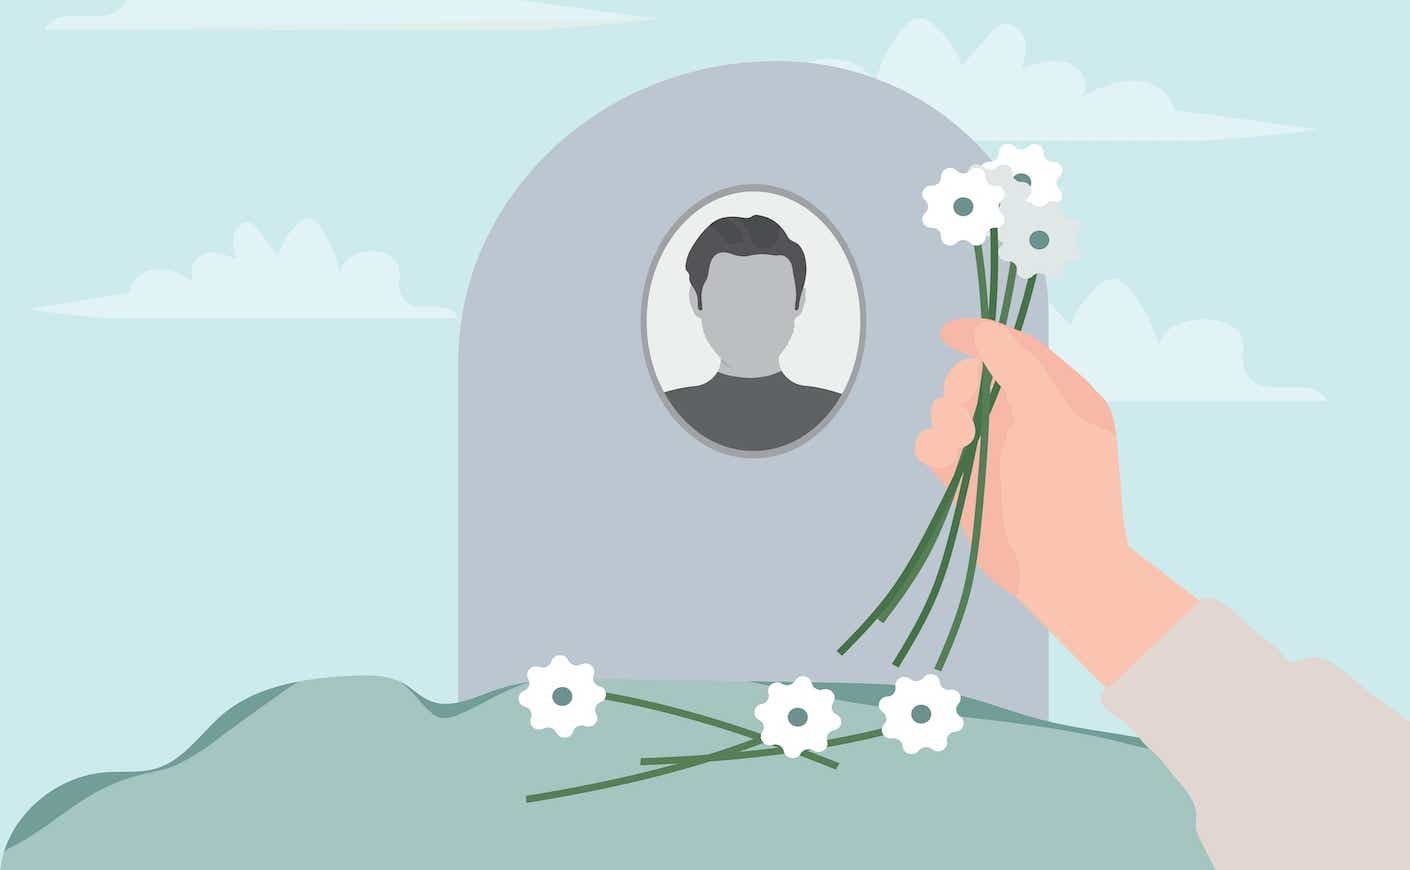 illustration of a hand putting flowers on a grave